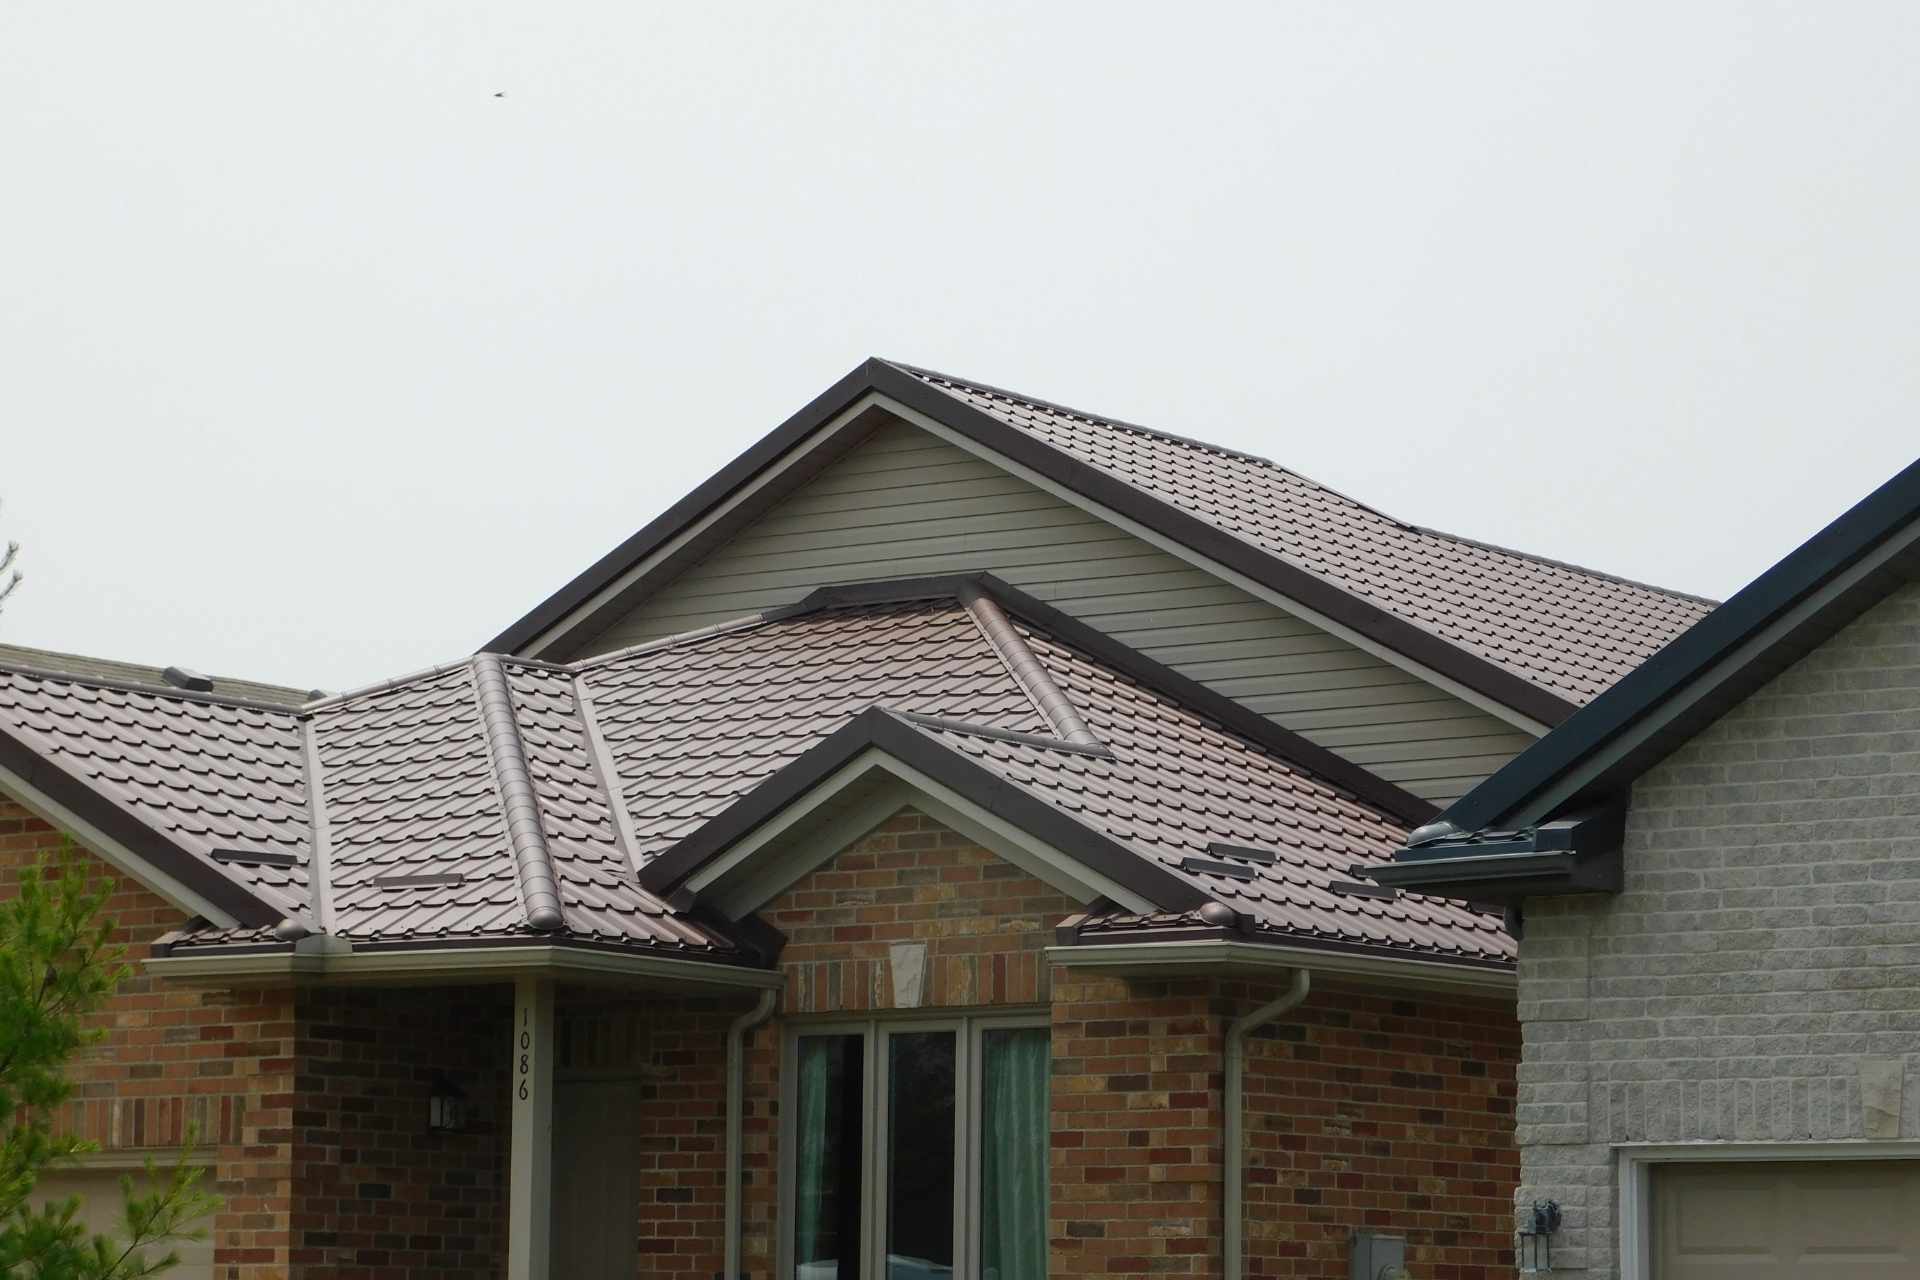 What Should I Look for When Hiring a Roofing Company?